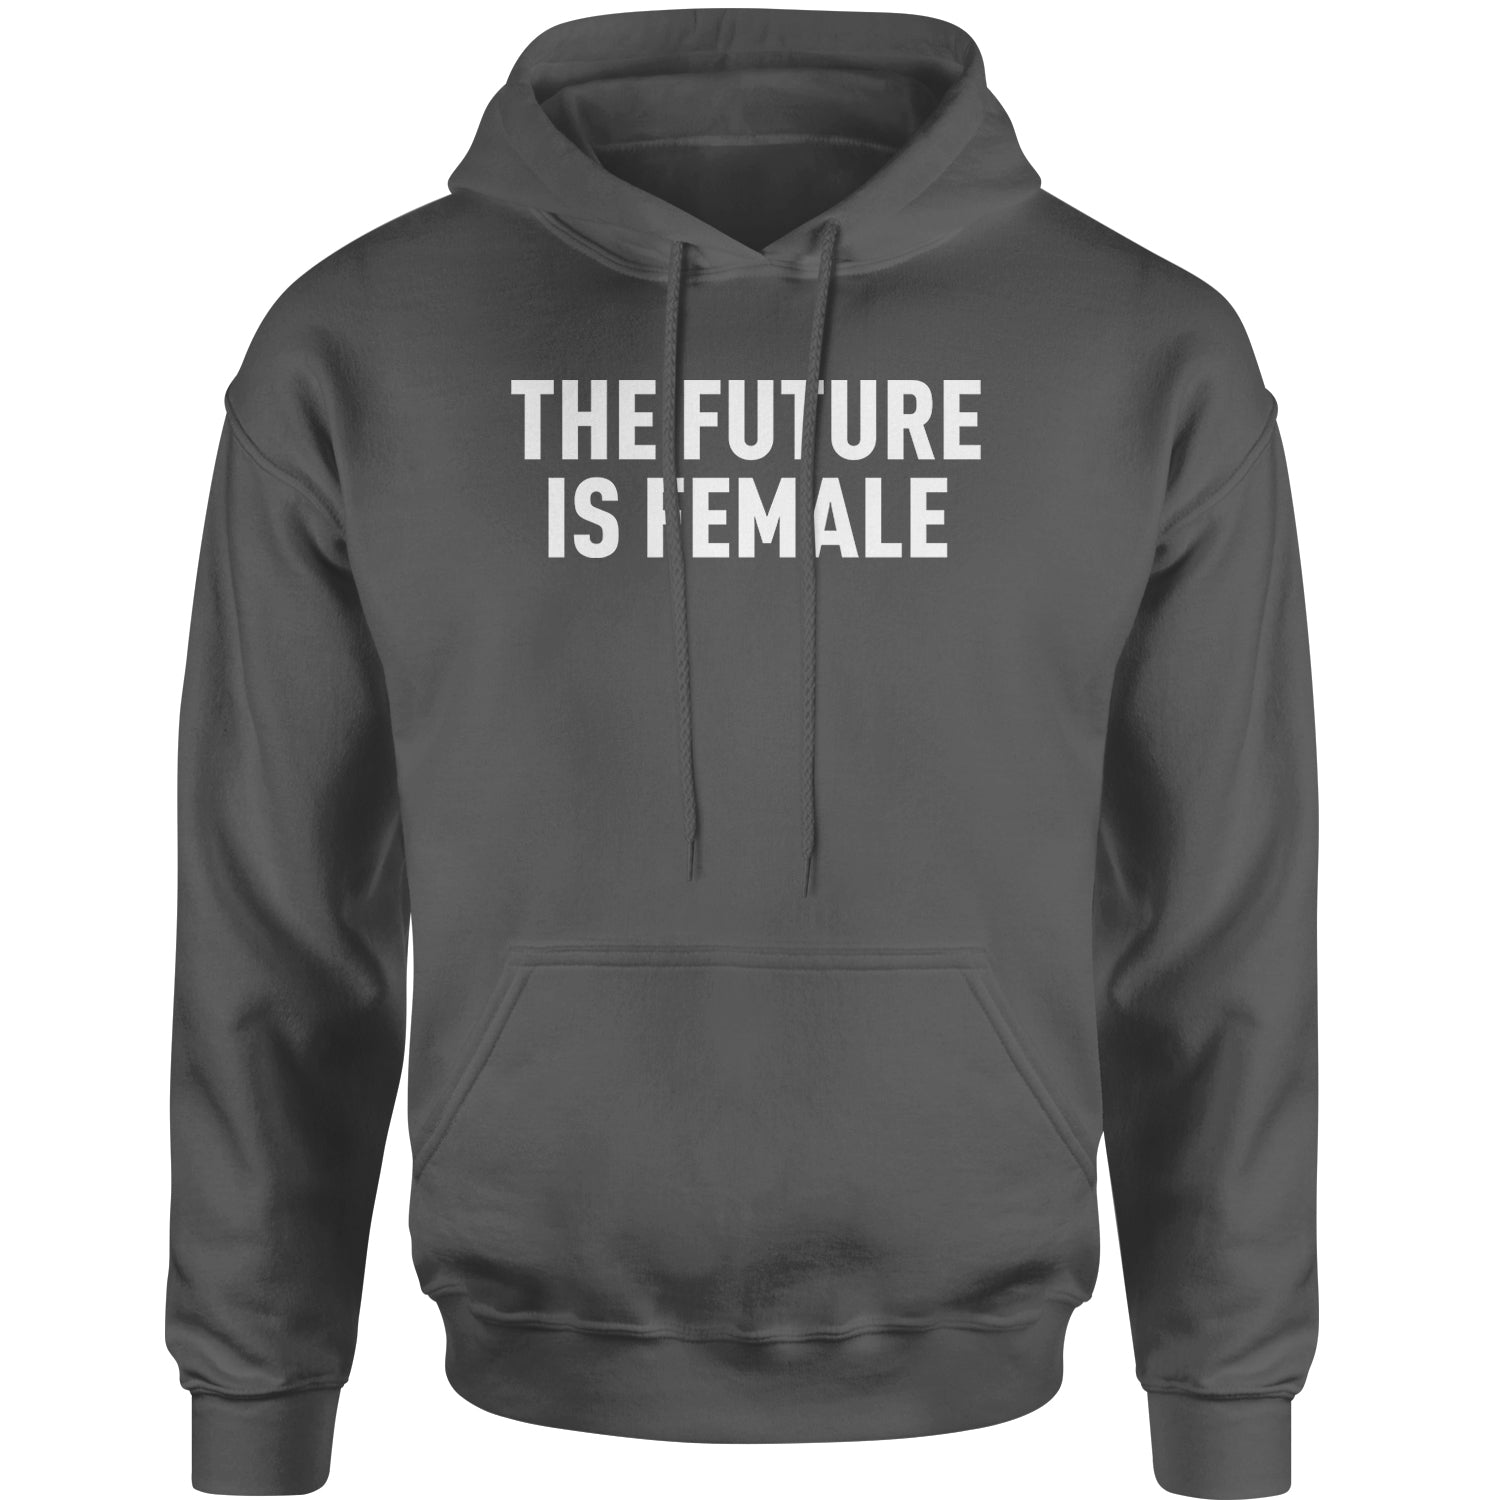 The Future Is Female Feminism Adult Hoodie Sweatshirt female, feminism, feminist, femme, future, is, liberation, suffrage, the by Expression Tees